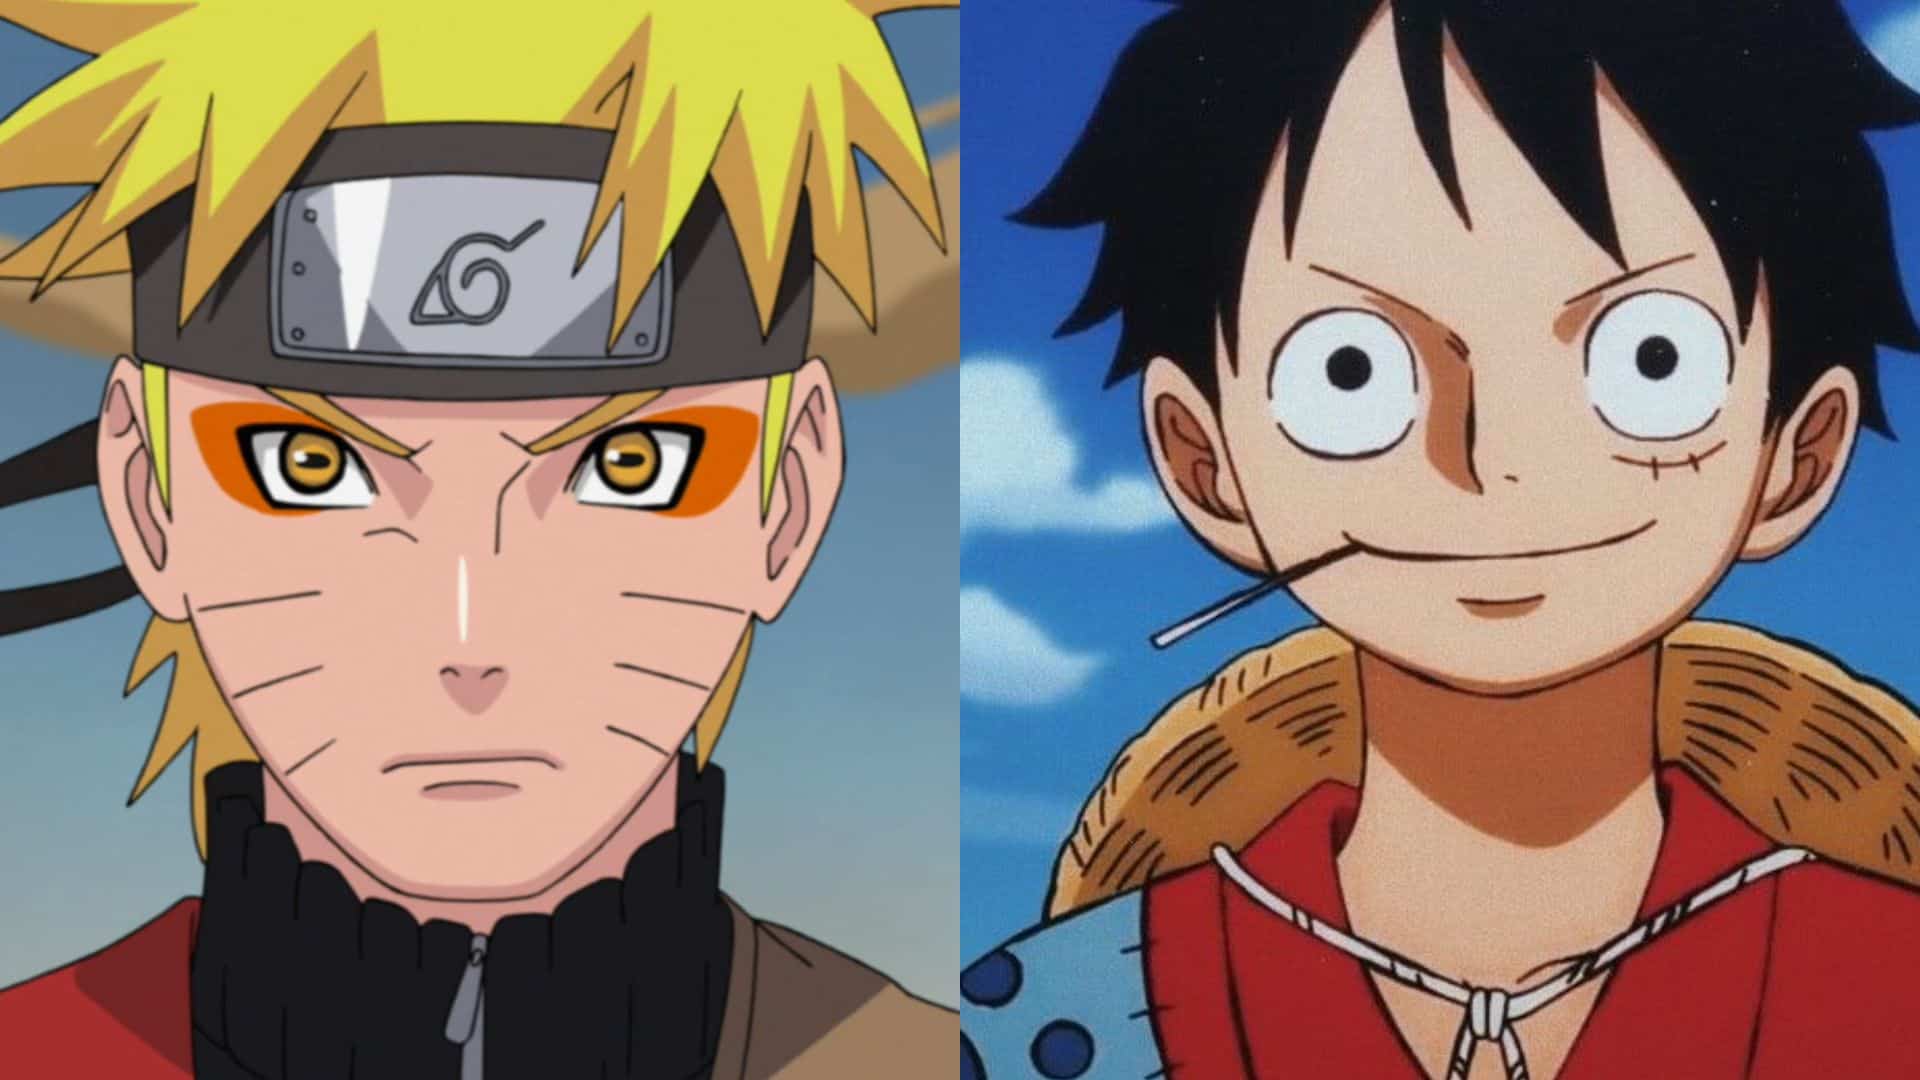 Naruto Vs. Luffy: Who Would Win In A Fight?